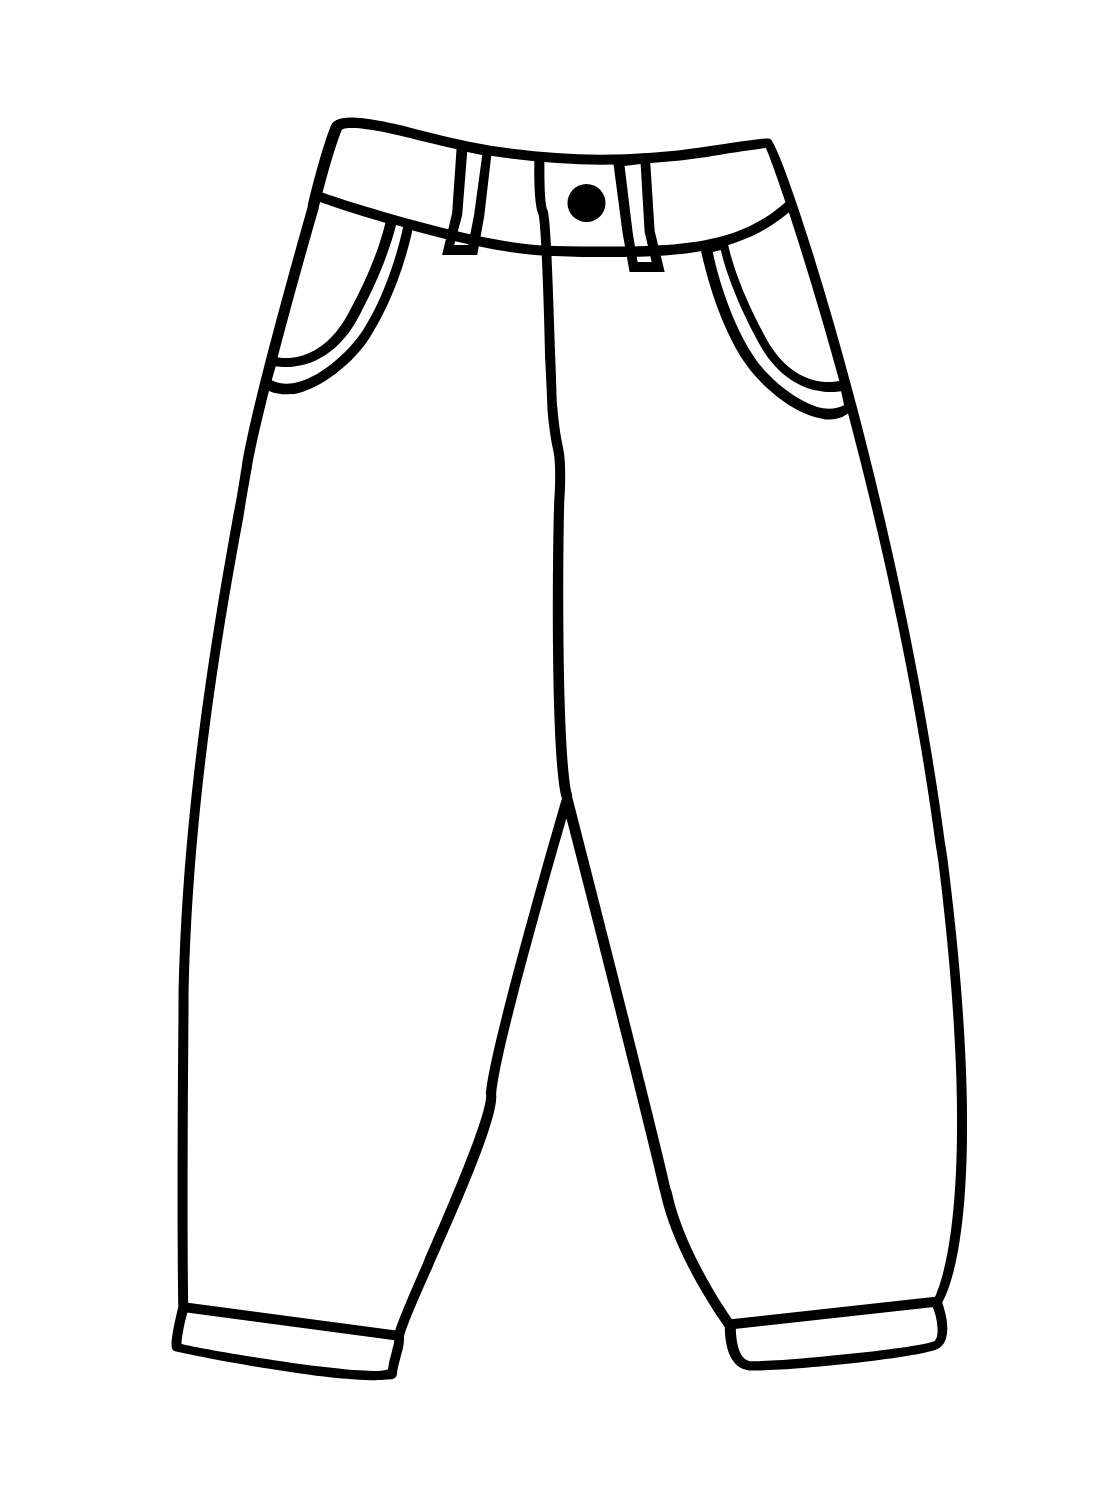 Plain Cargo Pants Coloring Pages - Free Printable Coloring Pages